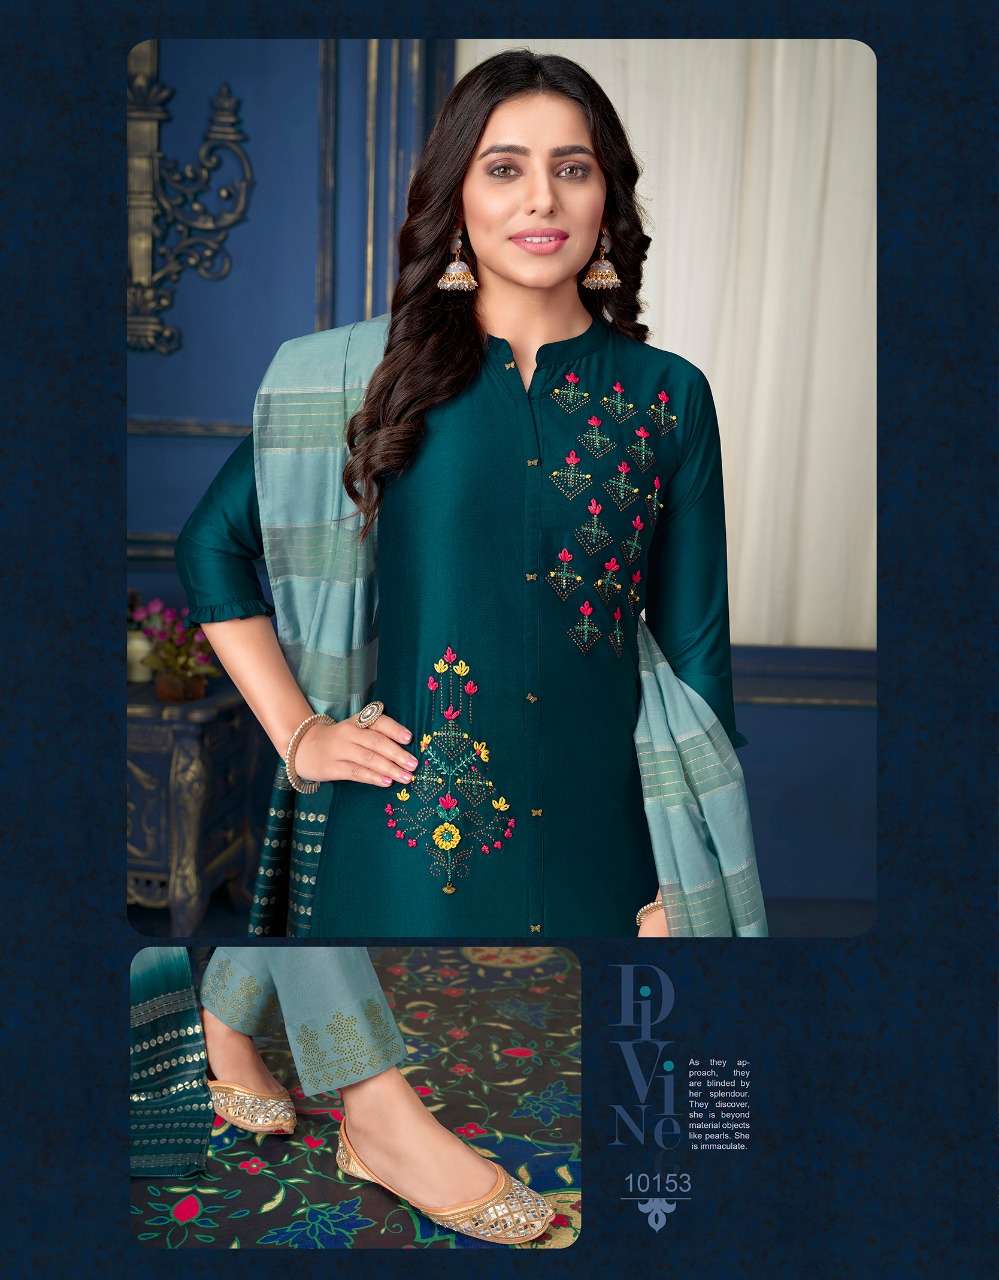 lily and lali muskan vol-3 10151-10158 series bember silk ready made salwar suits online shopping surat 